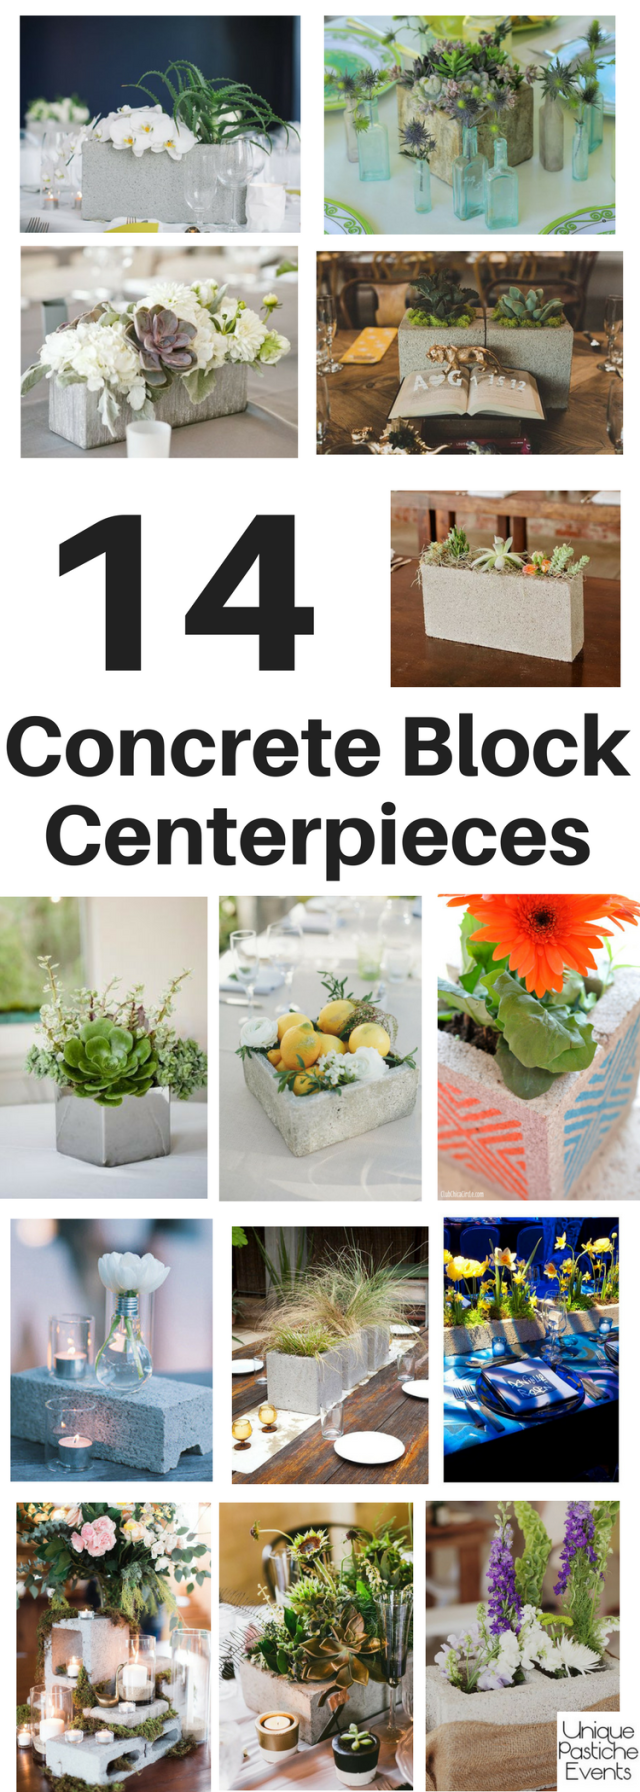 14 Concrete Block Centerpieces for Any Event